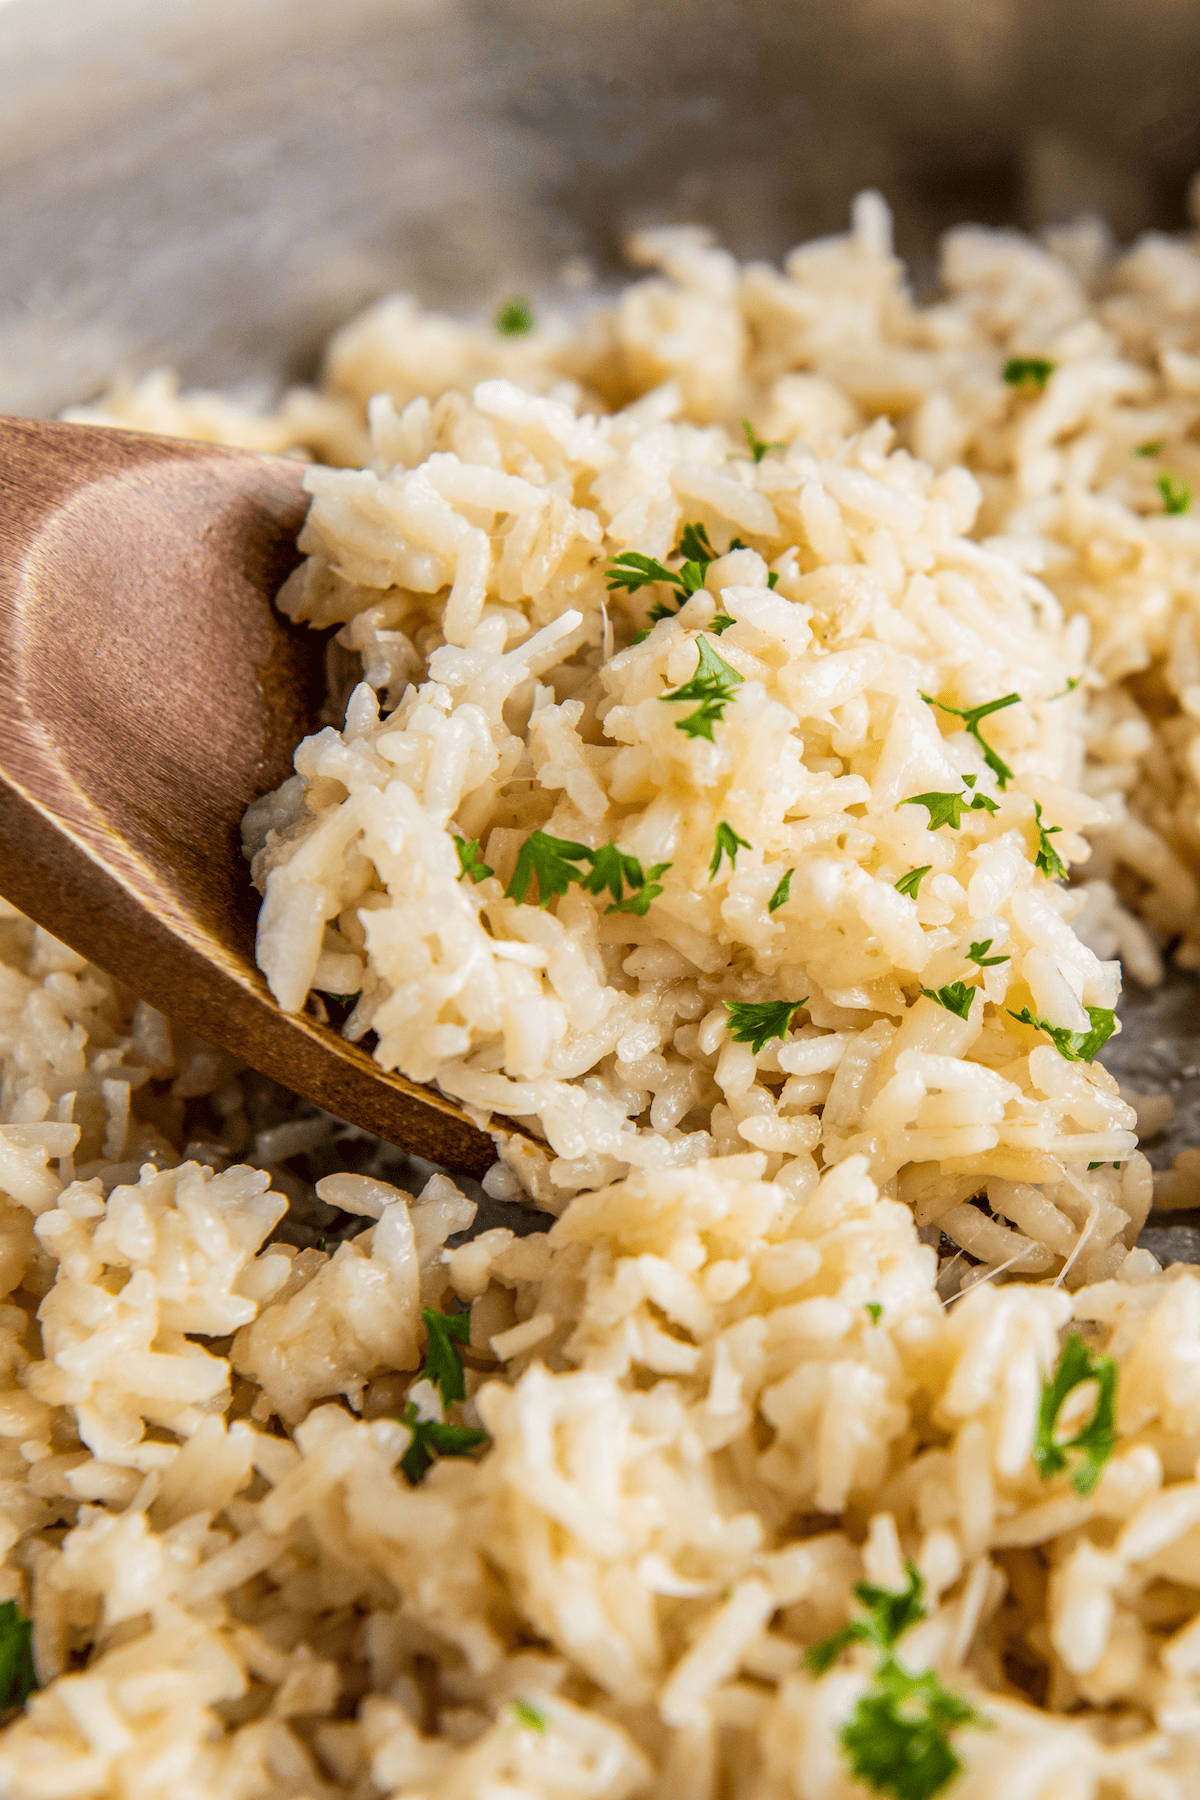 Fluffy long grain rice with minced garlic and shredded parmesan cheese.